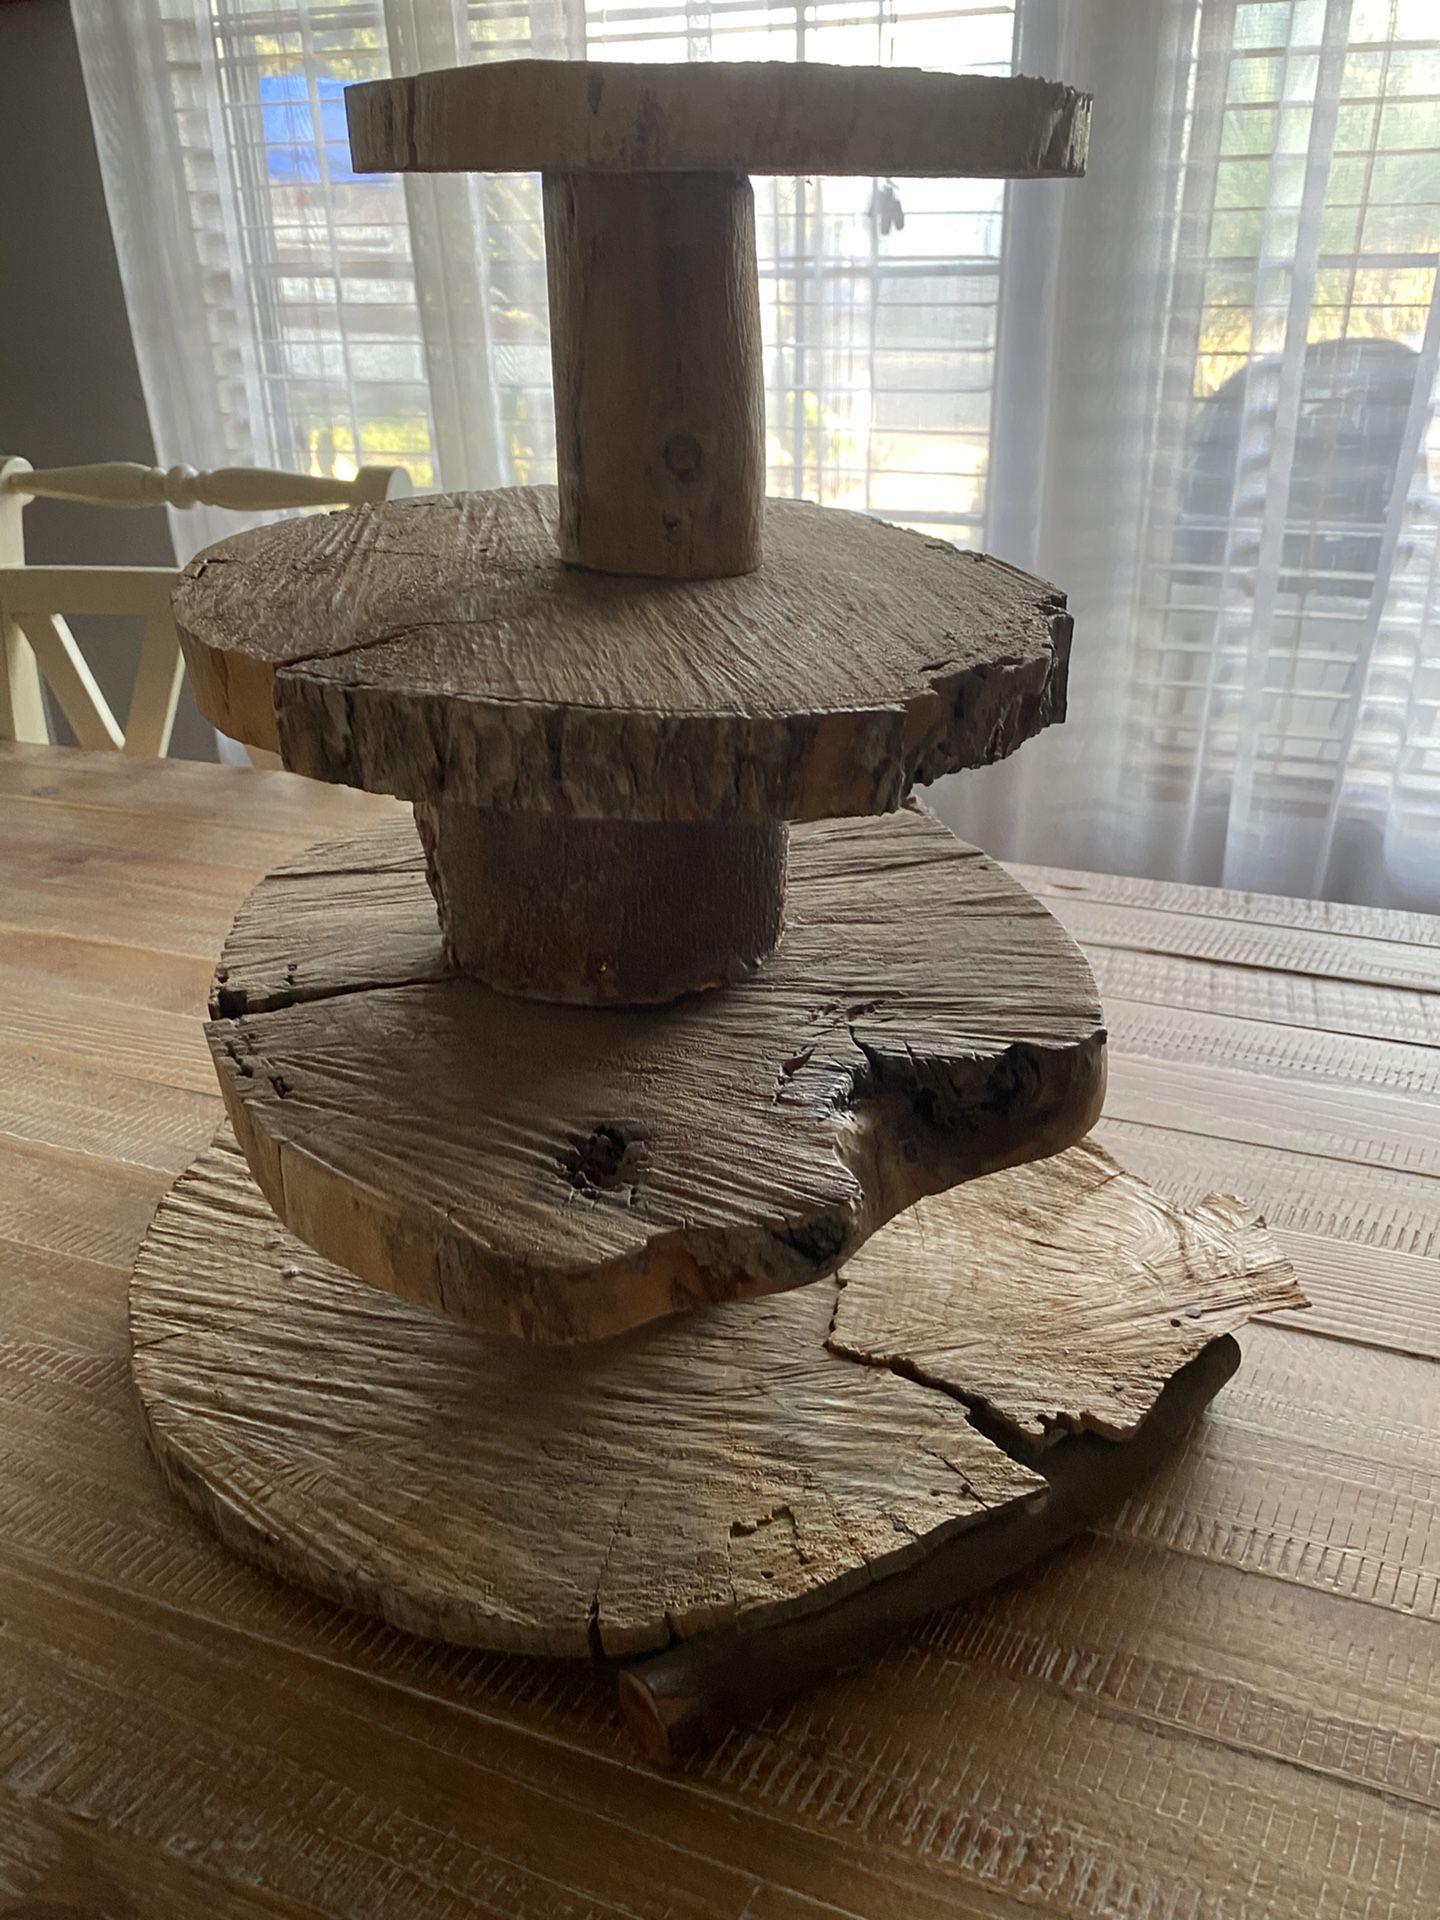 Rustic cup cake holder :))